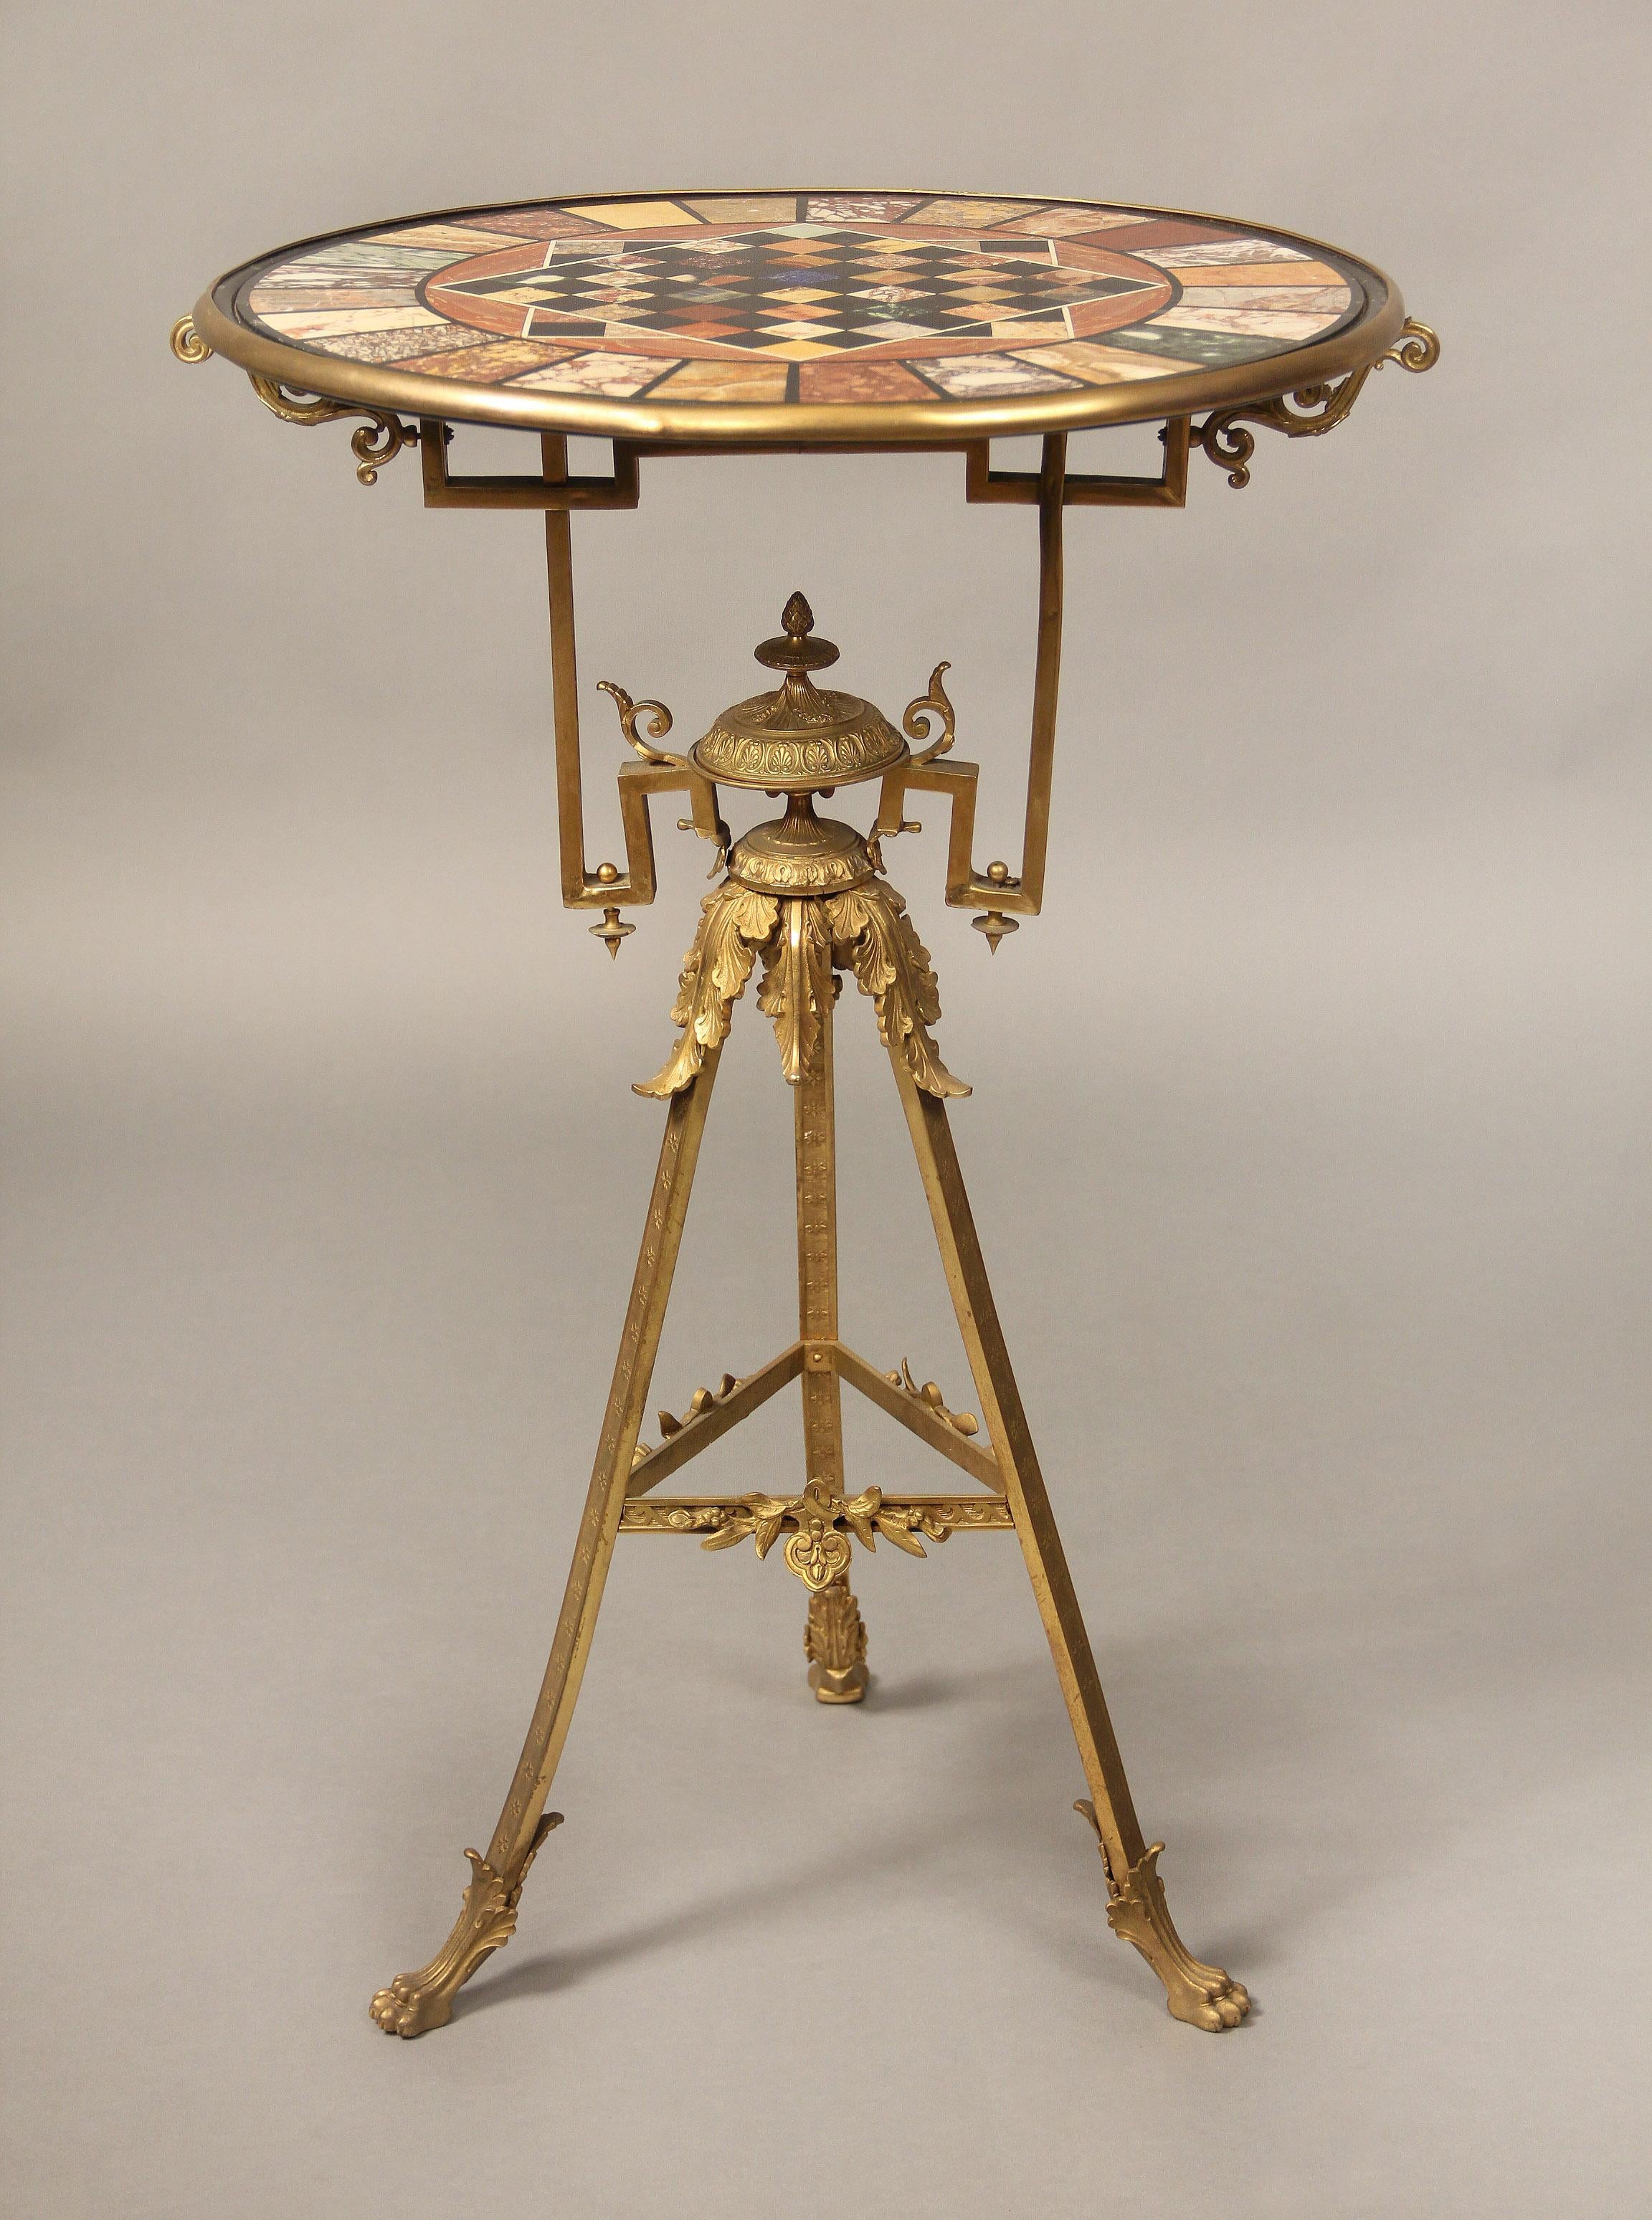 A very interesting late 19th century Italian gilt bronze specimen marble top game table

The inlaid circular top with a chess board design and surrounded with a variety of marbles including lapis lazuli, verde antico, brocatelle, pietra paesina,